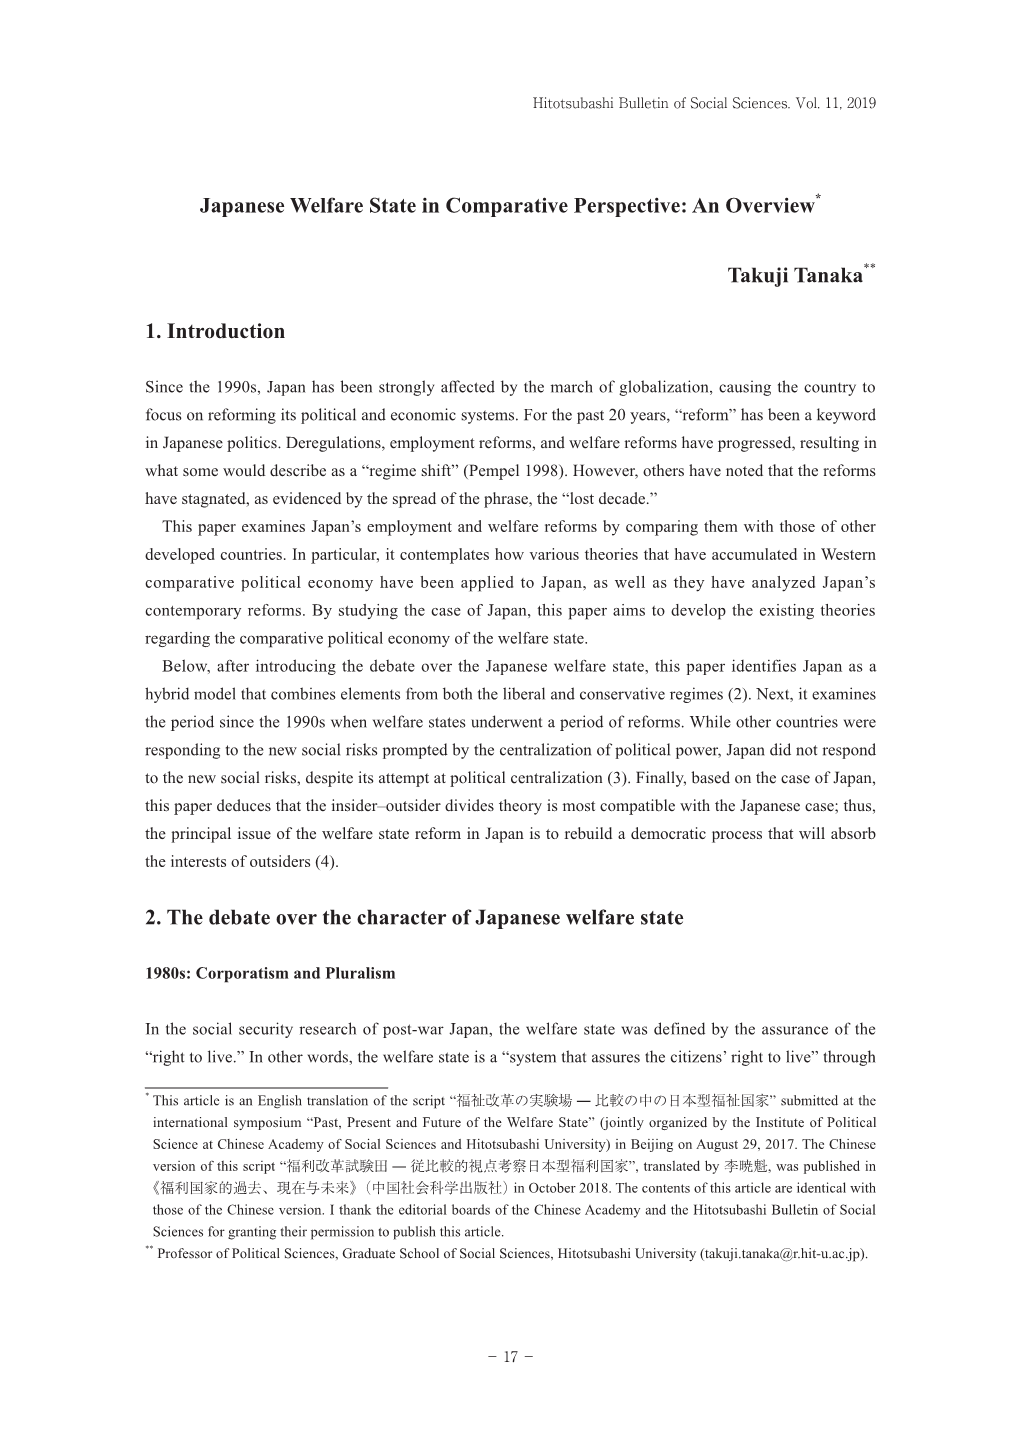 Japanese Welfare State in Comparative Perspective: an Overview*